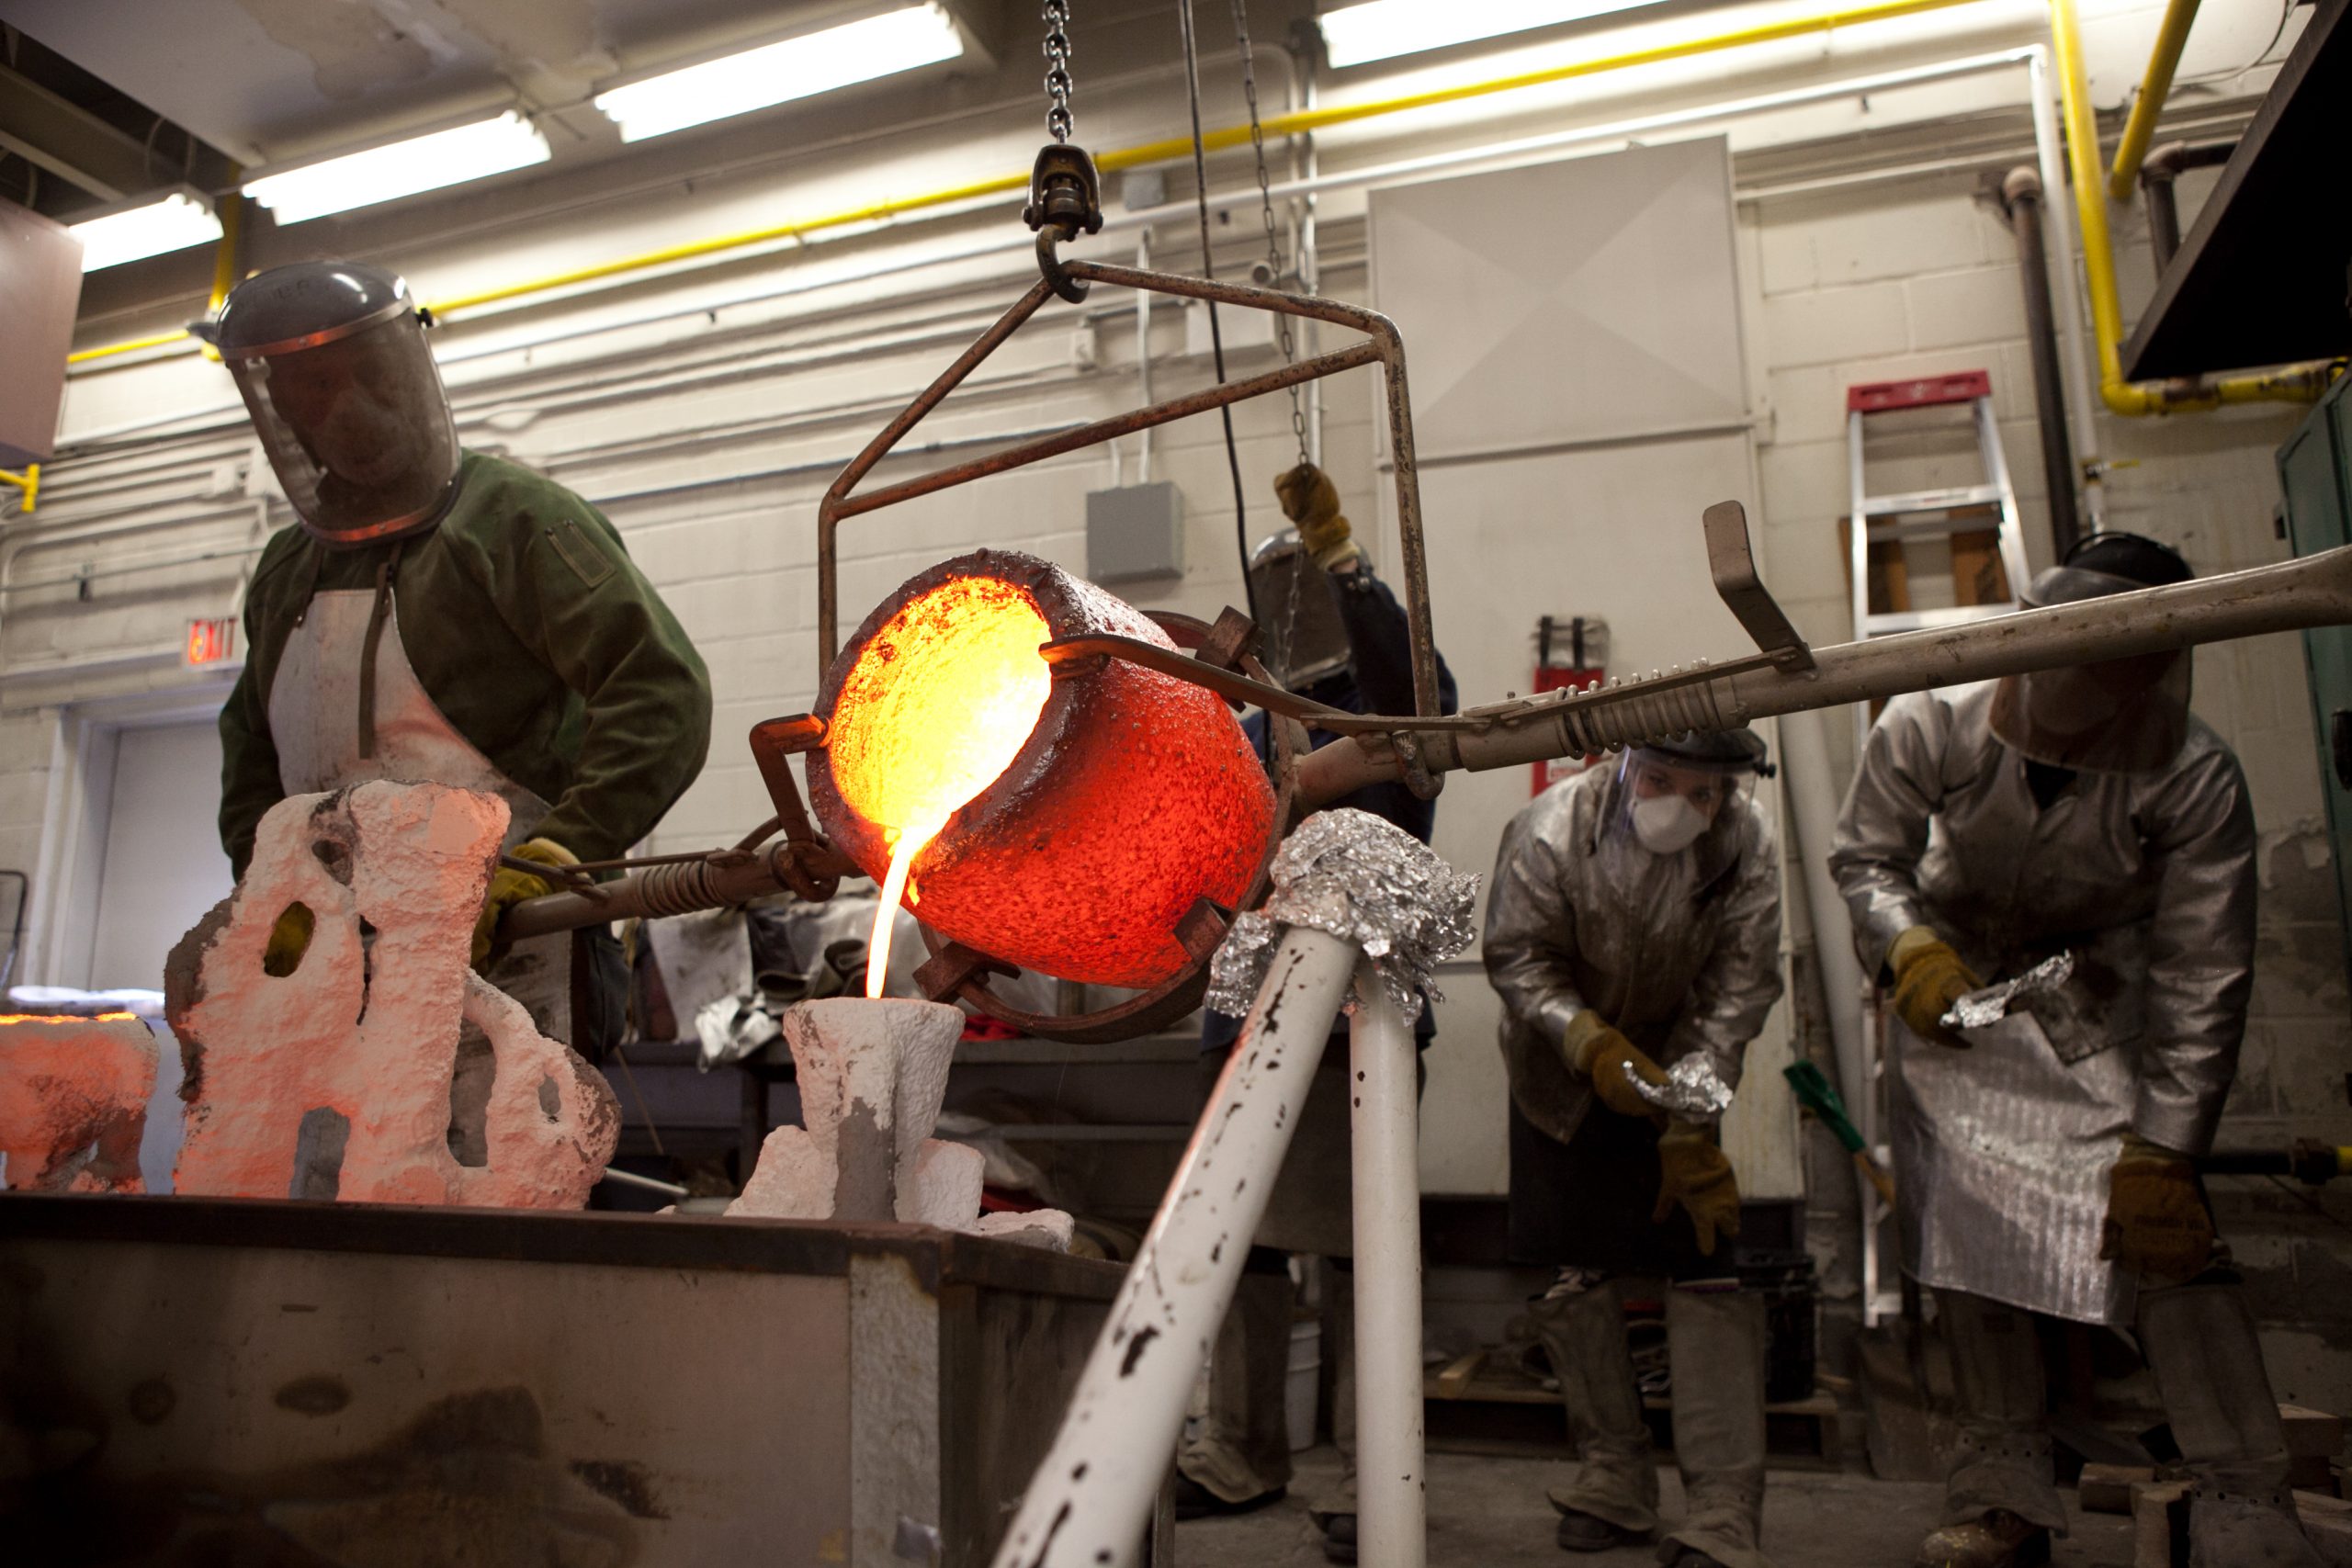 OCAD University's foundry: Artists in protective gear pouring metal into mould.